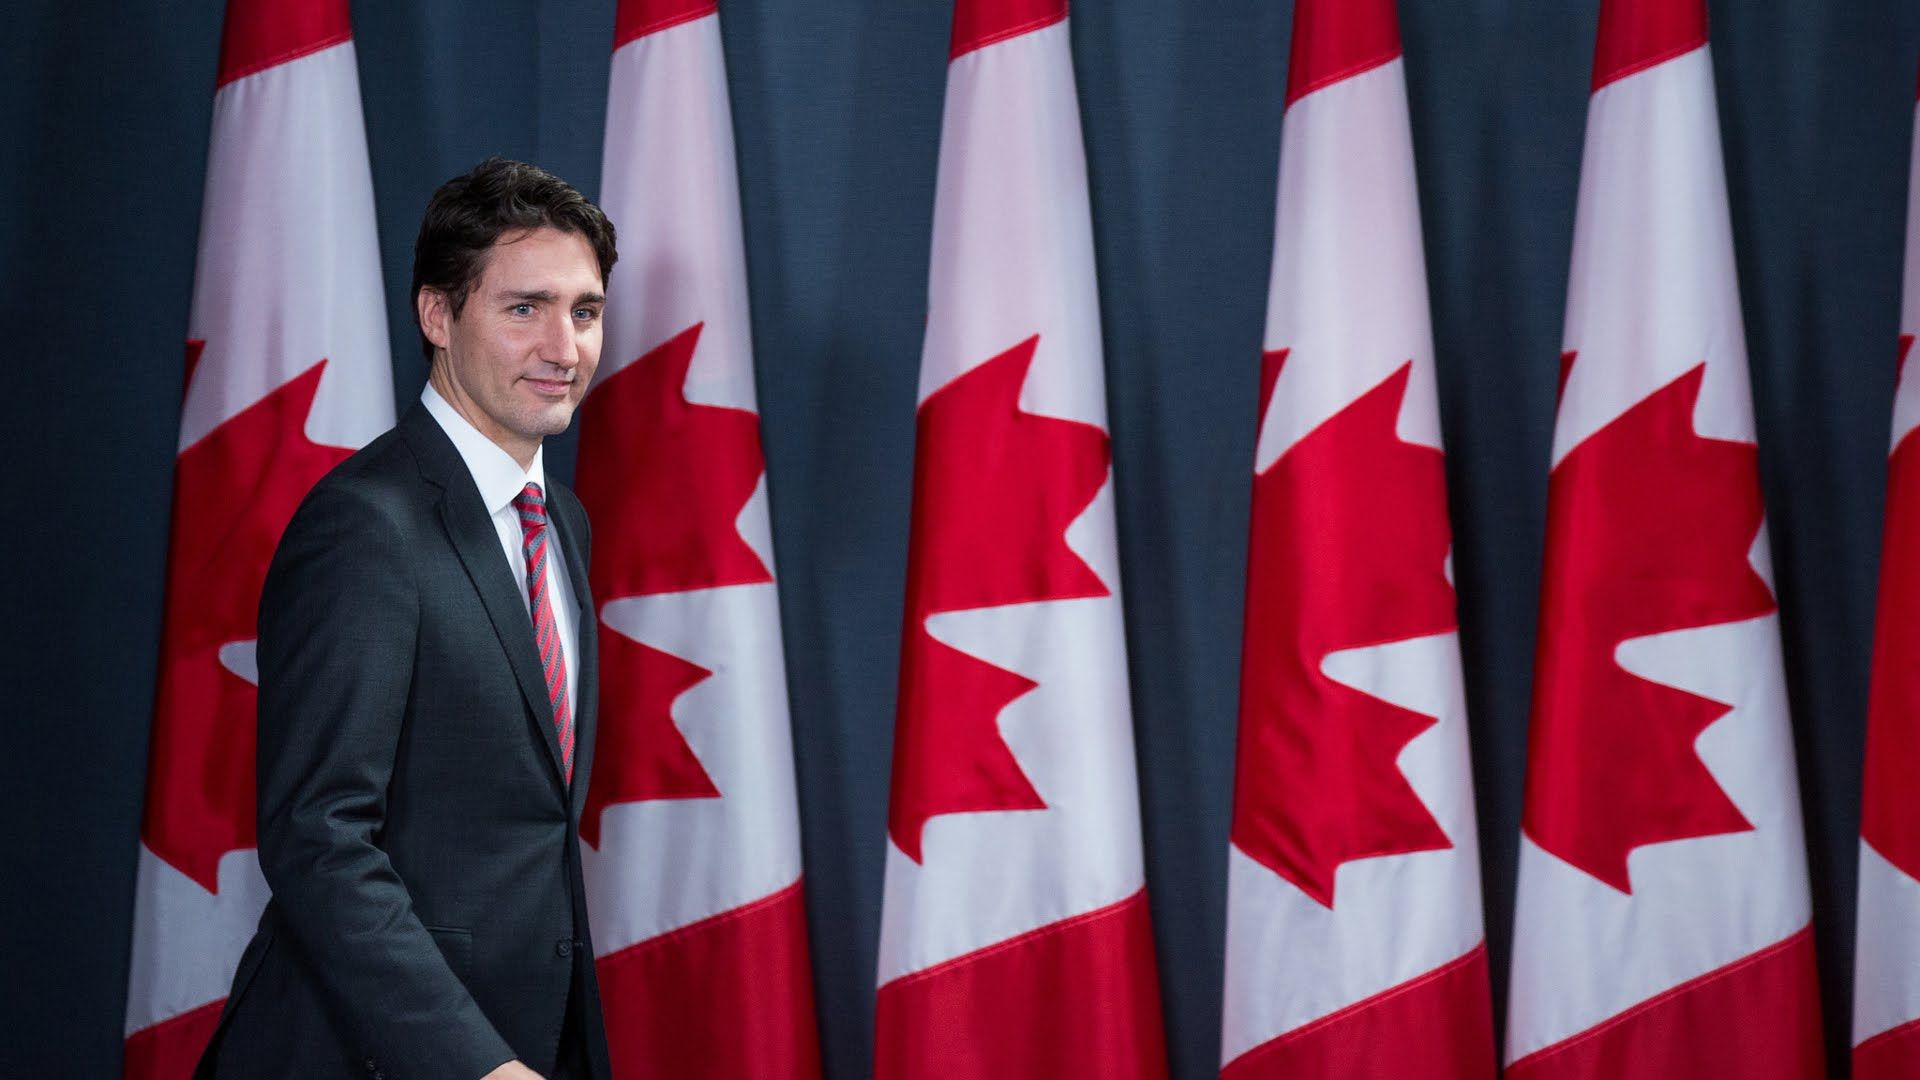 More than a Pretty Face: Justin Trudeau and the Liberal Vision for Canada Political Review